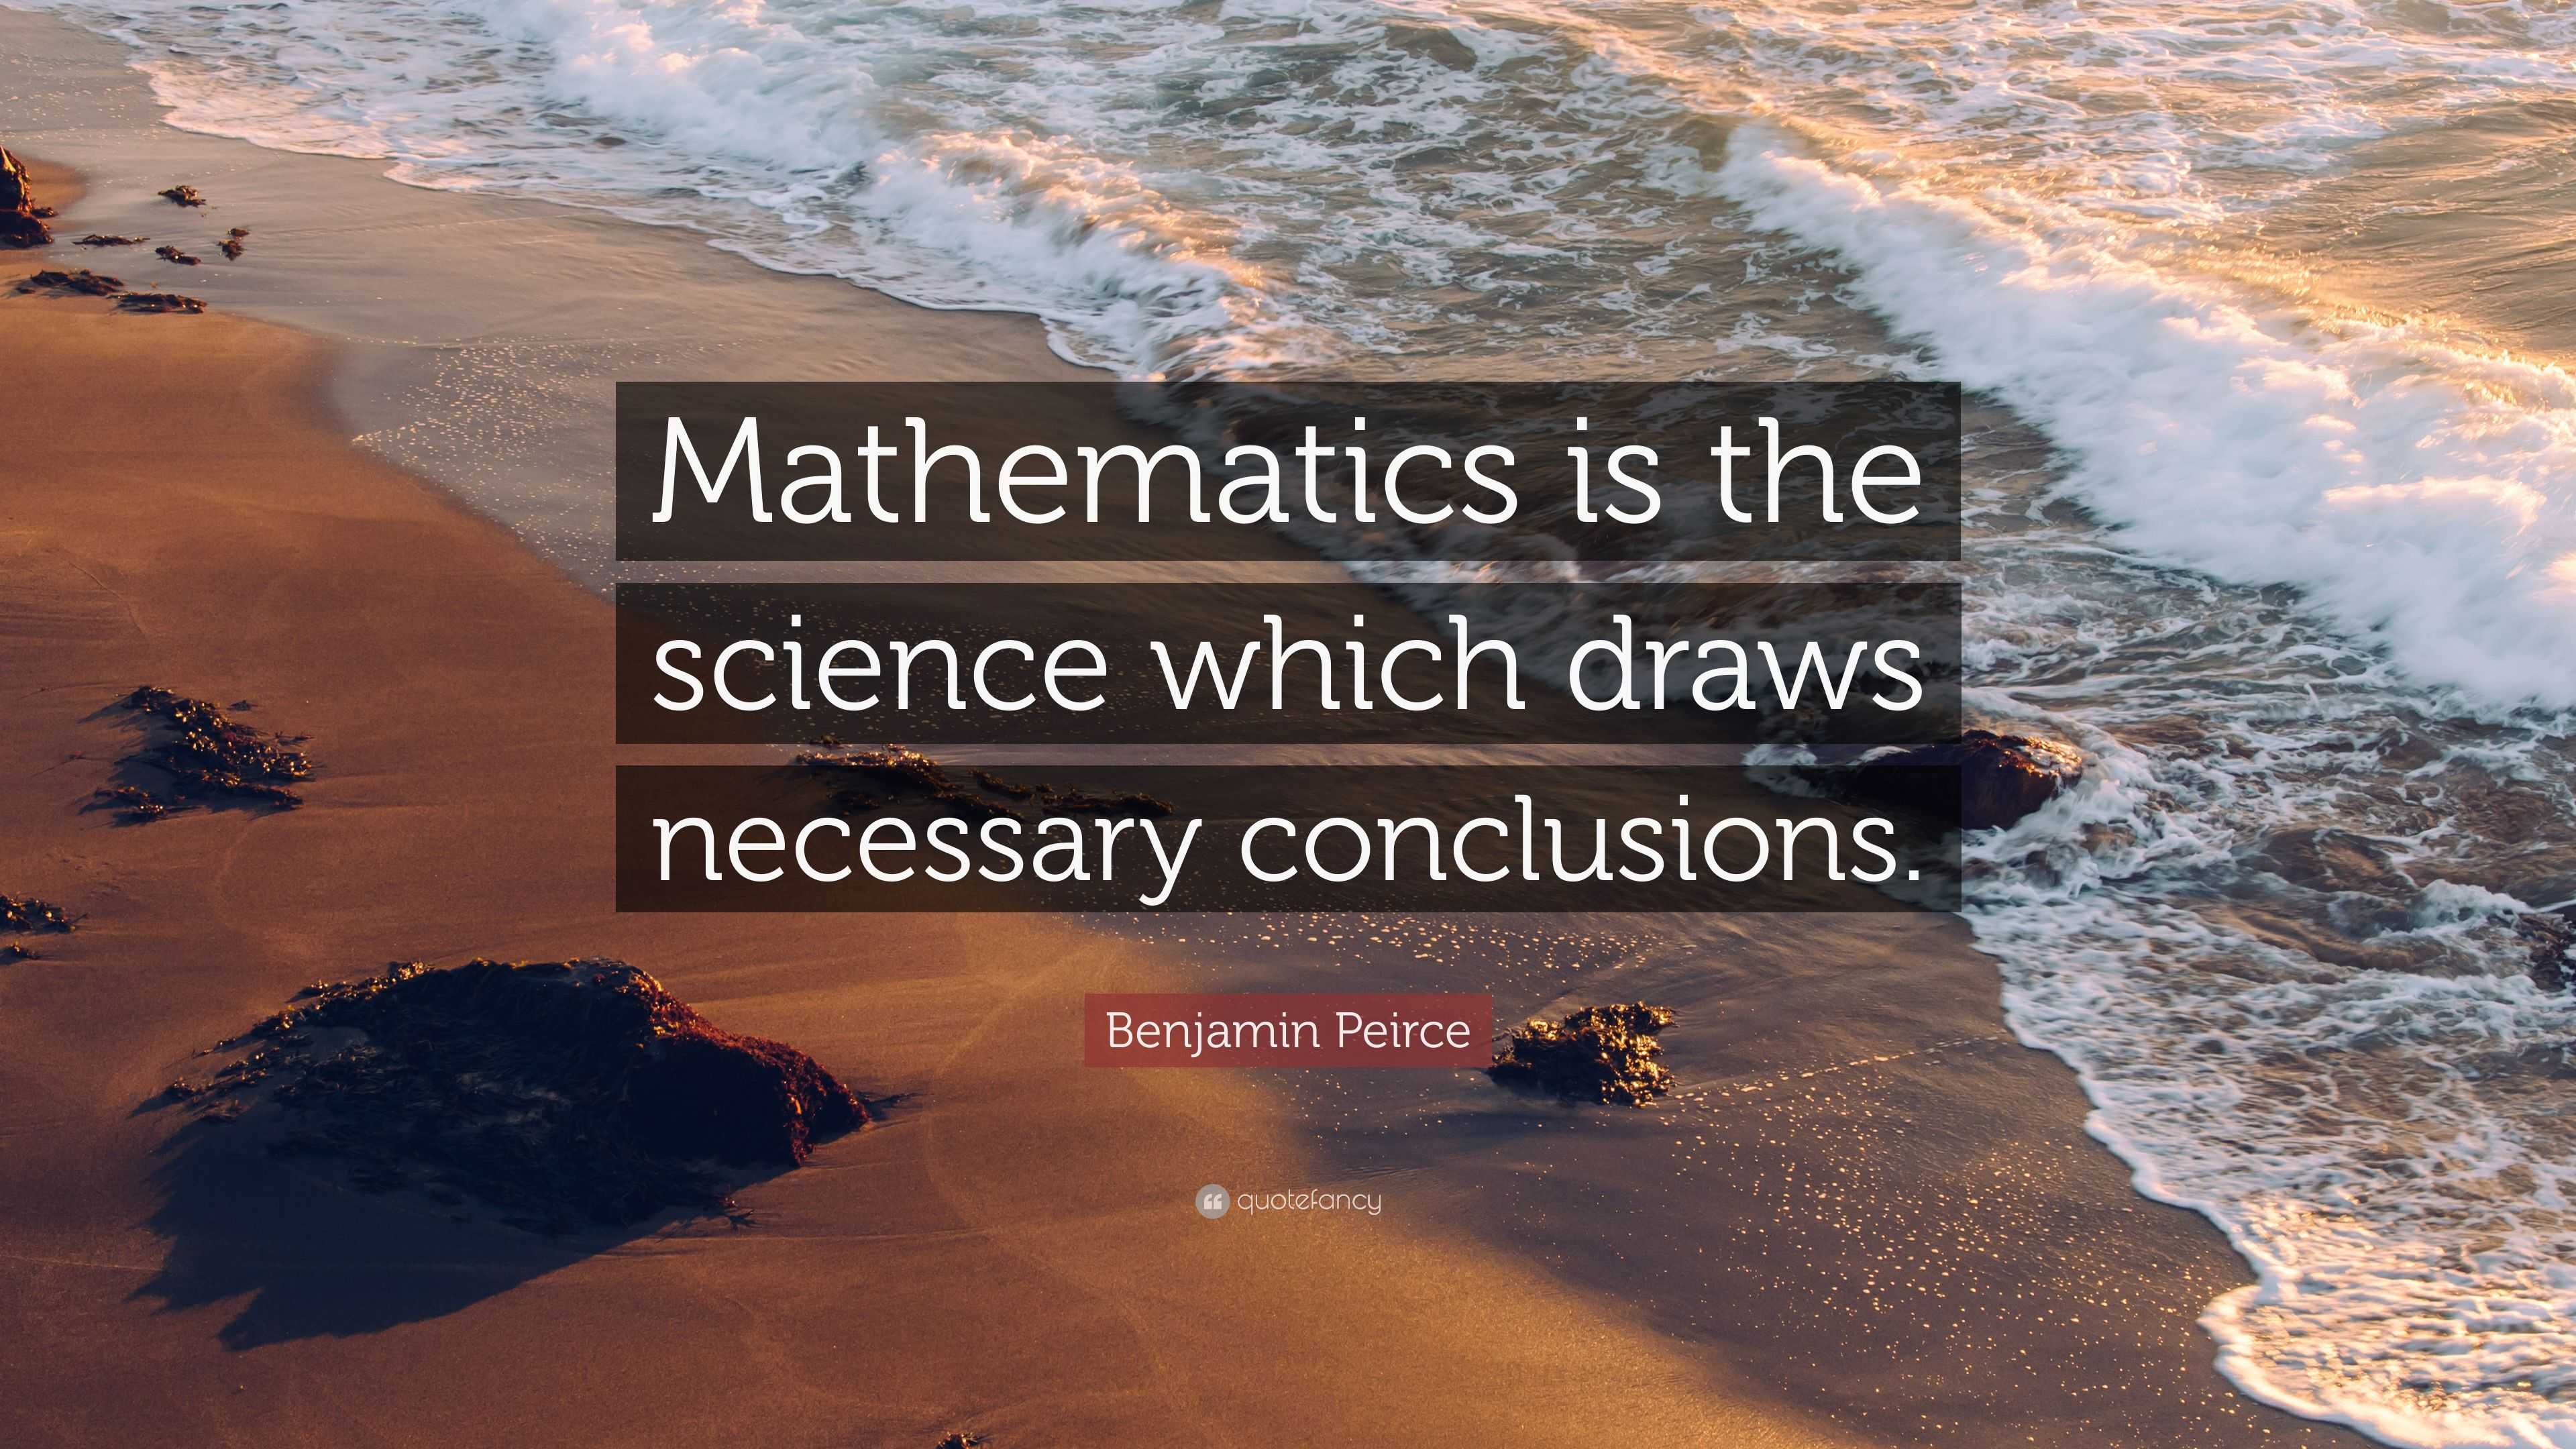 Benjamin Peirce Quote “Mathematics is the science which draws